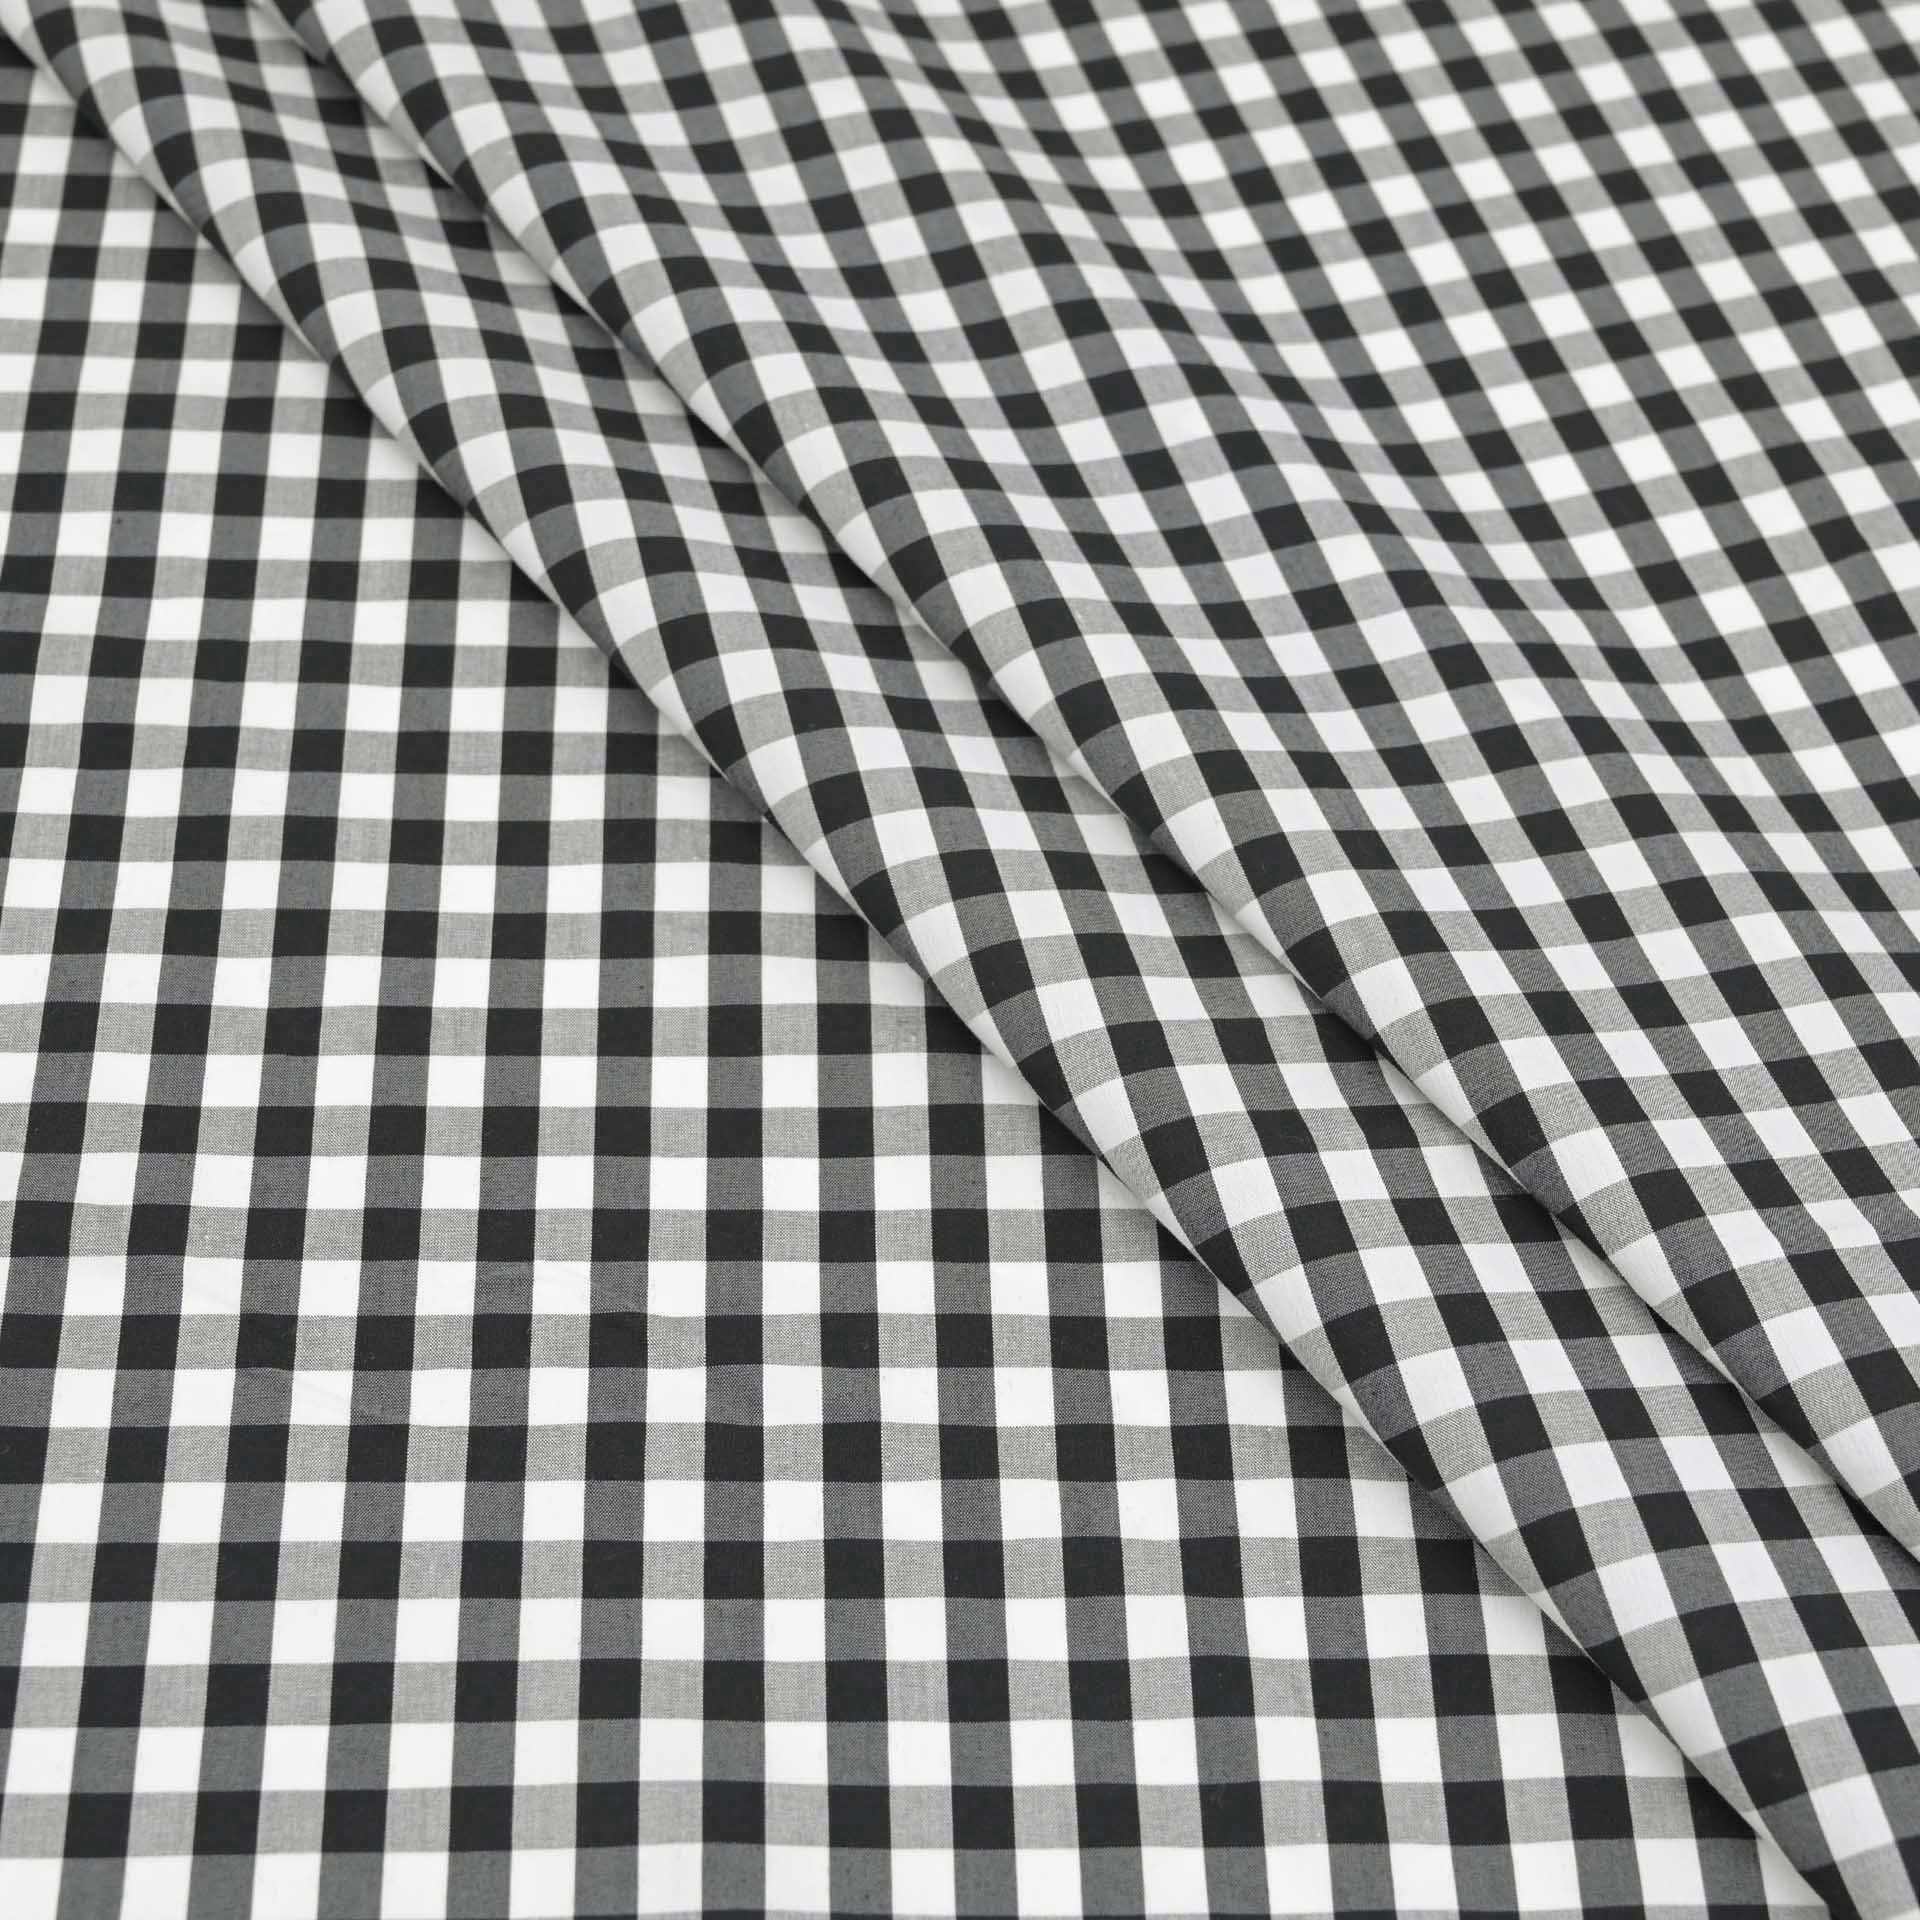 Black and White Check Fabric 367